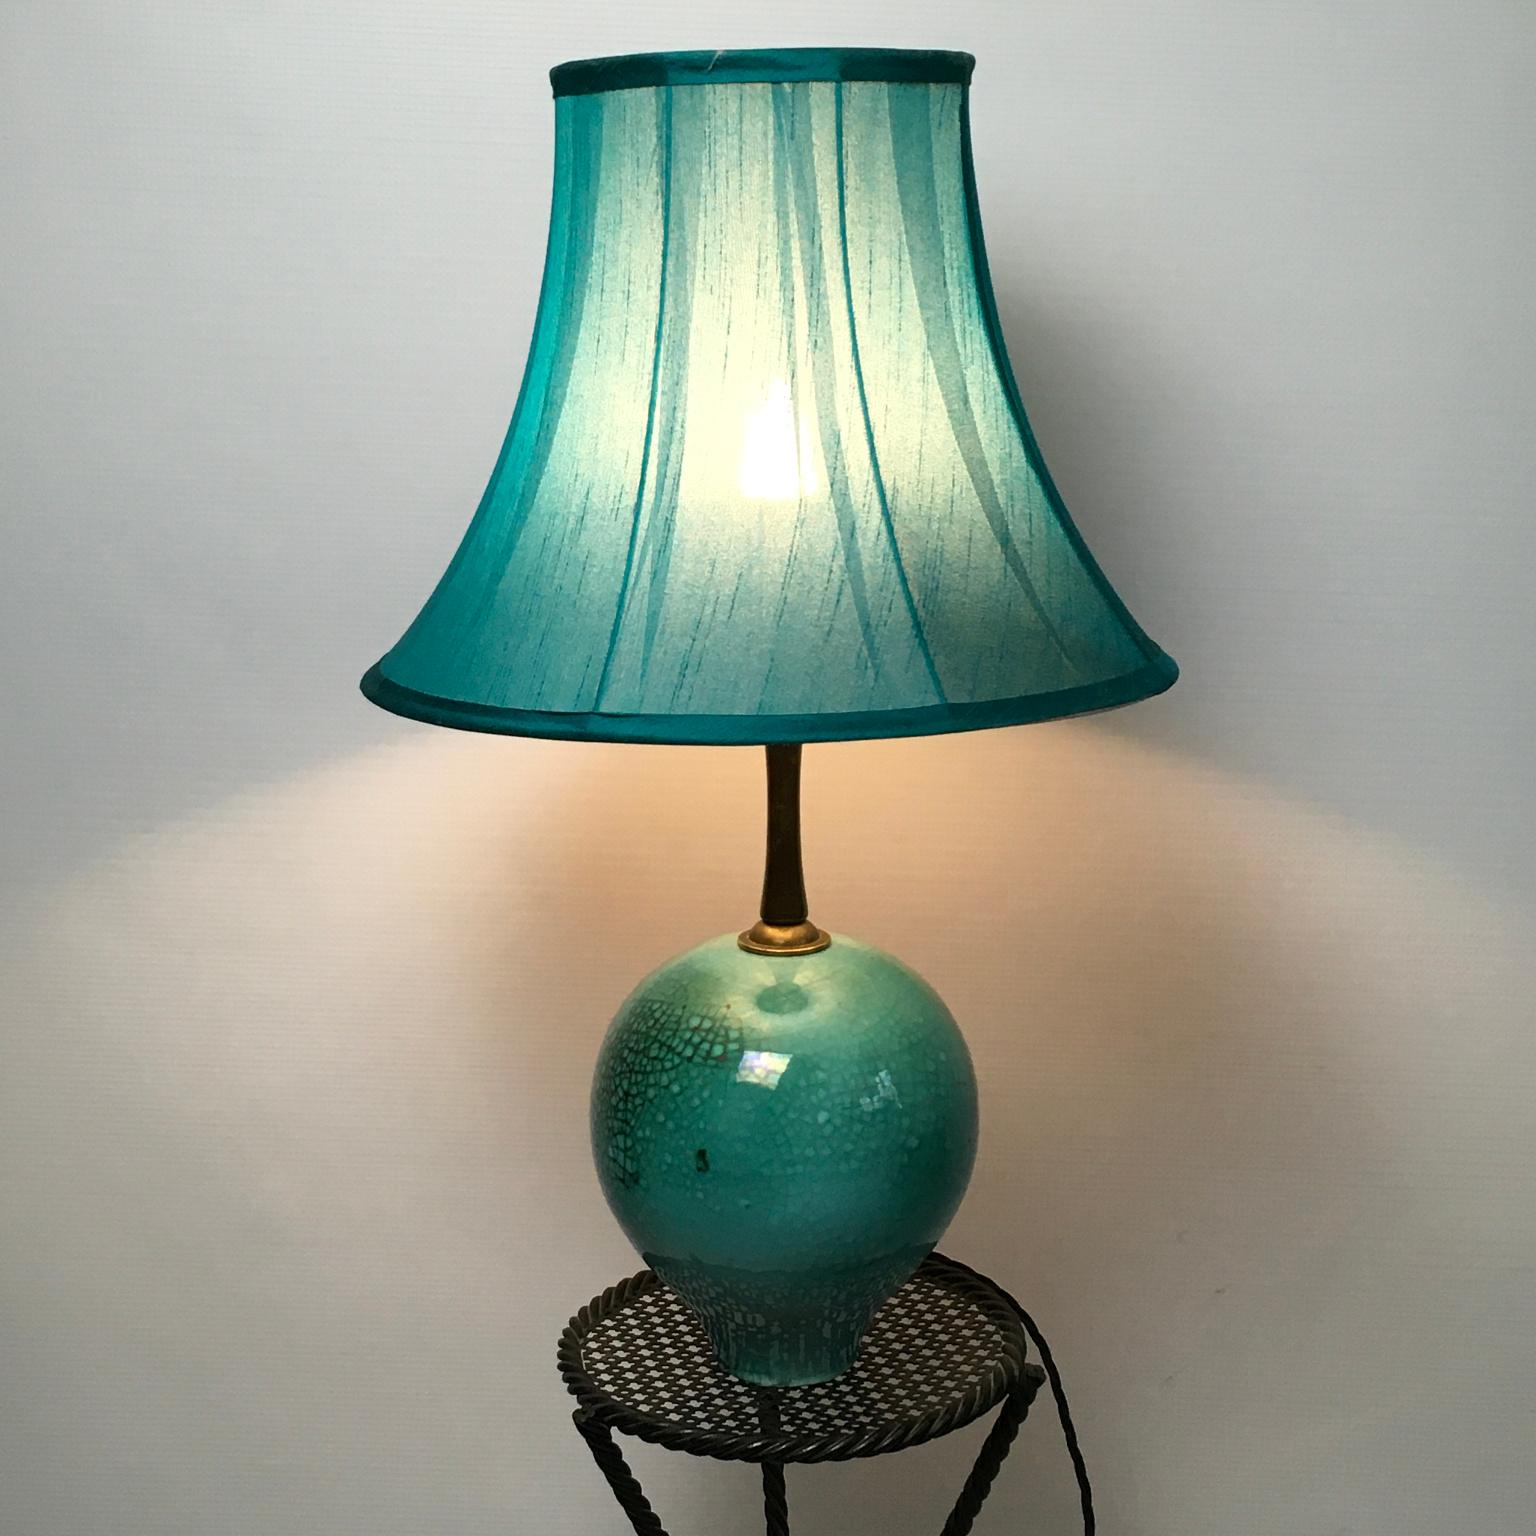 1930s Primavera Green Glazed and Cracked Ceramic Table Lamp For Sale 3